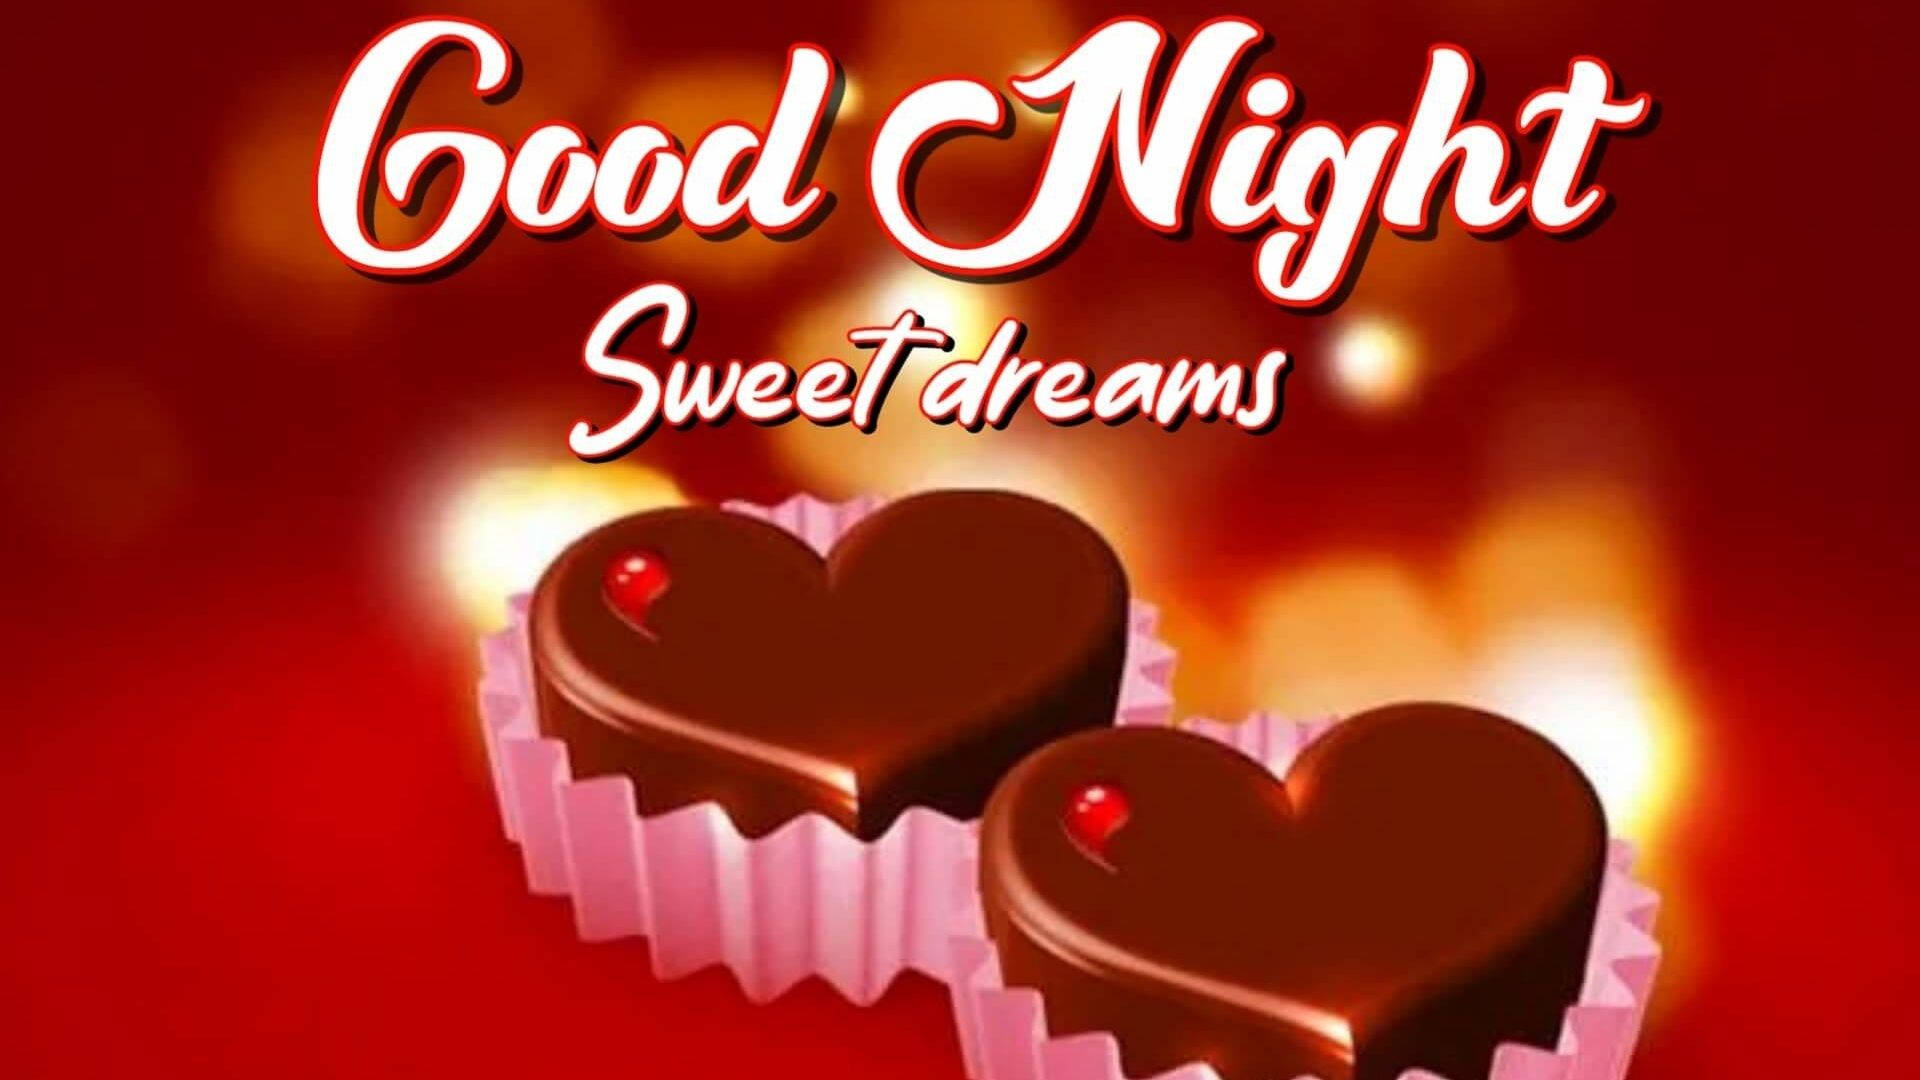 Sweet Dreams With Sweets Background